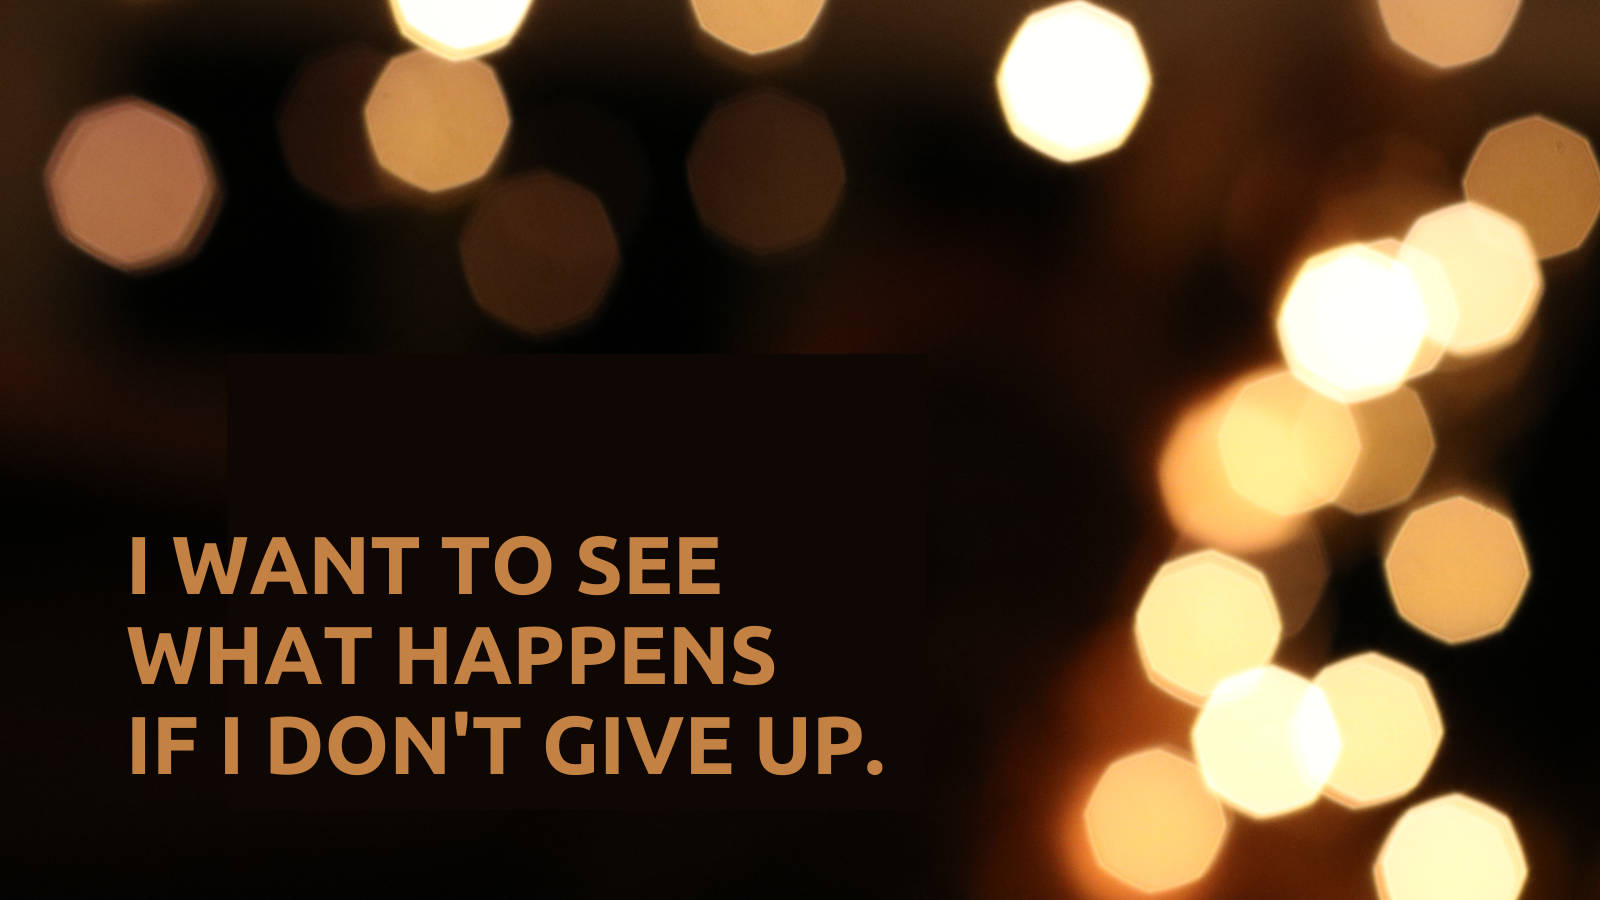 A dark brown background, and out of focus lights in various shades of gold, surrounding the text: I want to see what happens if I don't give up.